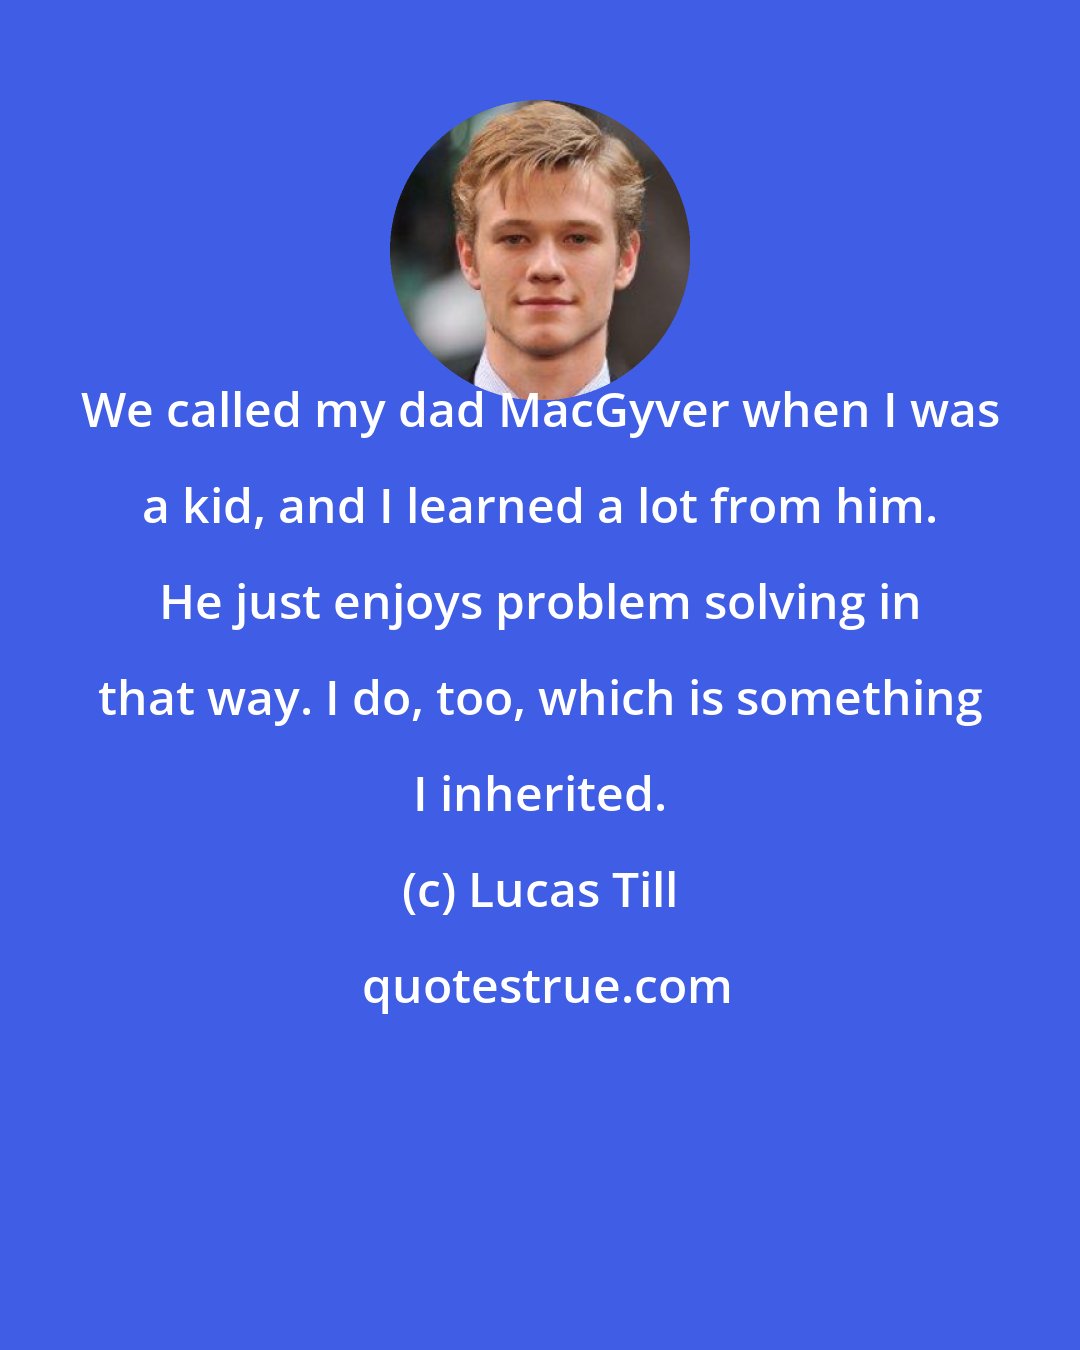 Lucas Till: We called my dad MacGyver when I was a kid, and I learned a lot from him. He just enjoys problem solving in that way. I do, too, which is something I inherited.